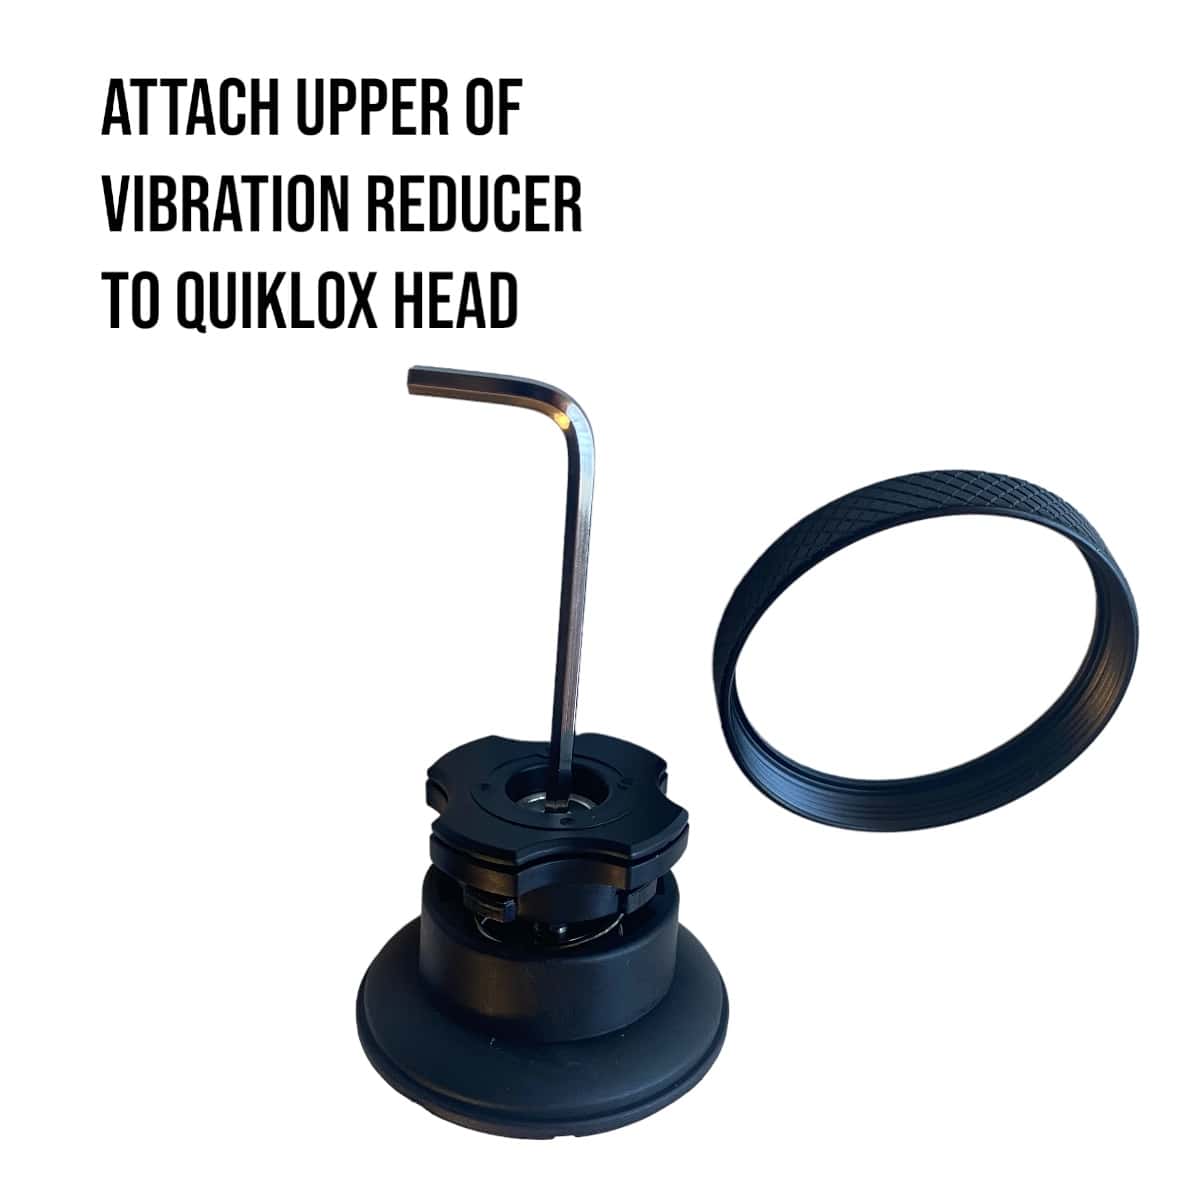 The QuikLox Vibration Dampener: Fitting step 3